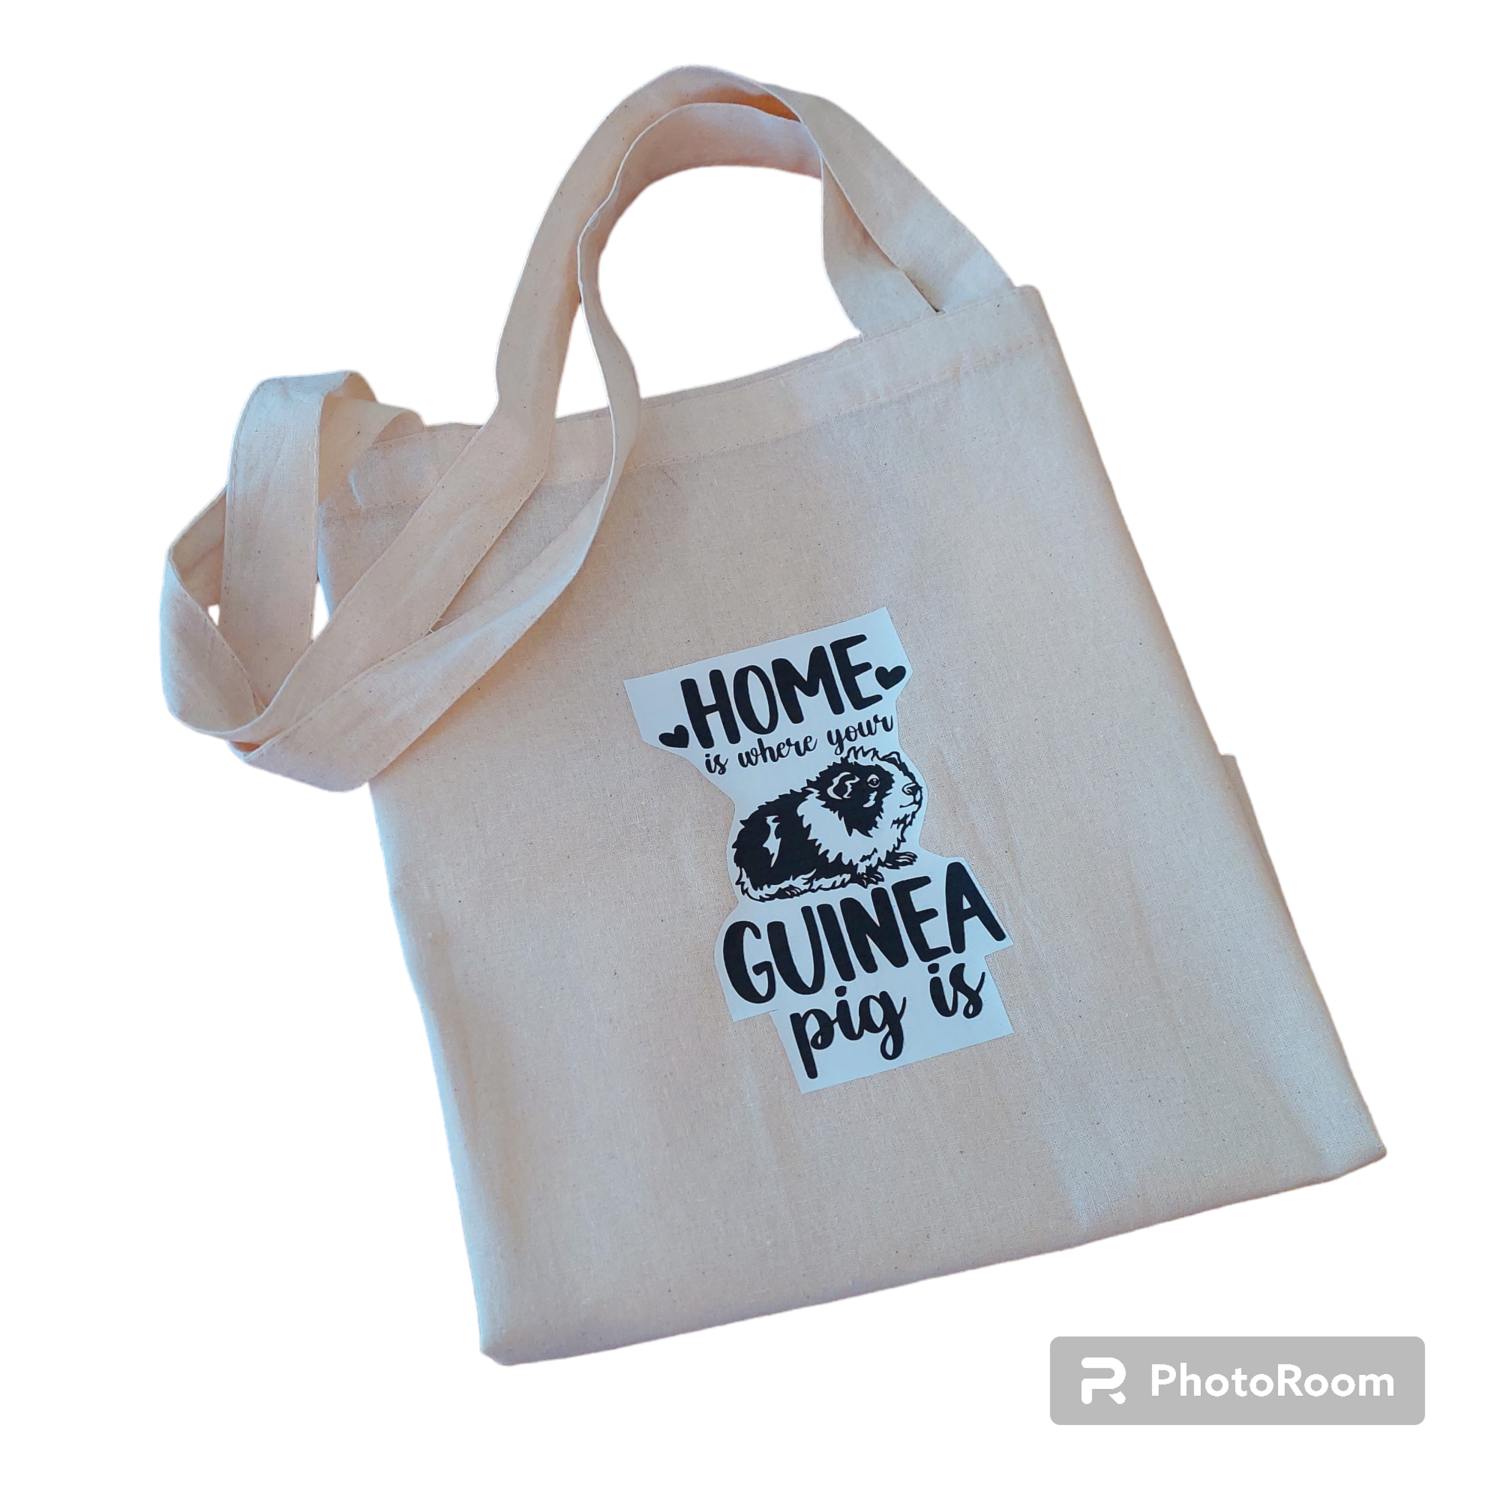 Guinea Pig Tote Bag - Home Is Where Your Guinea Pig is Natural